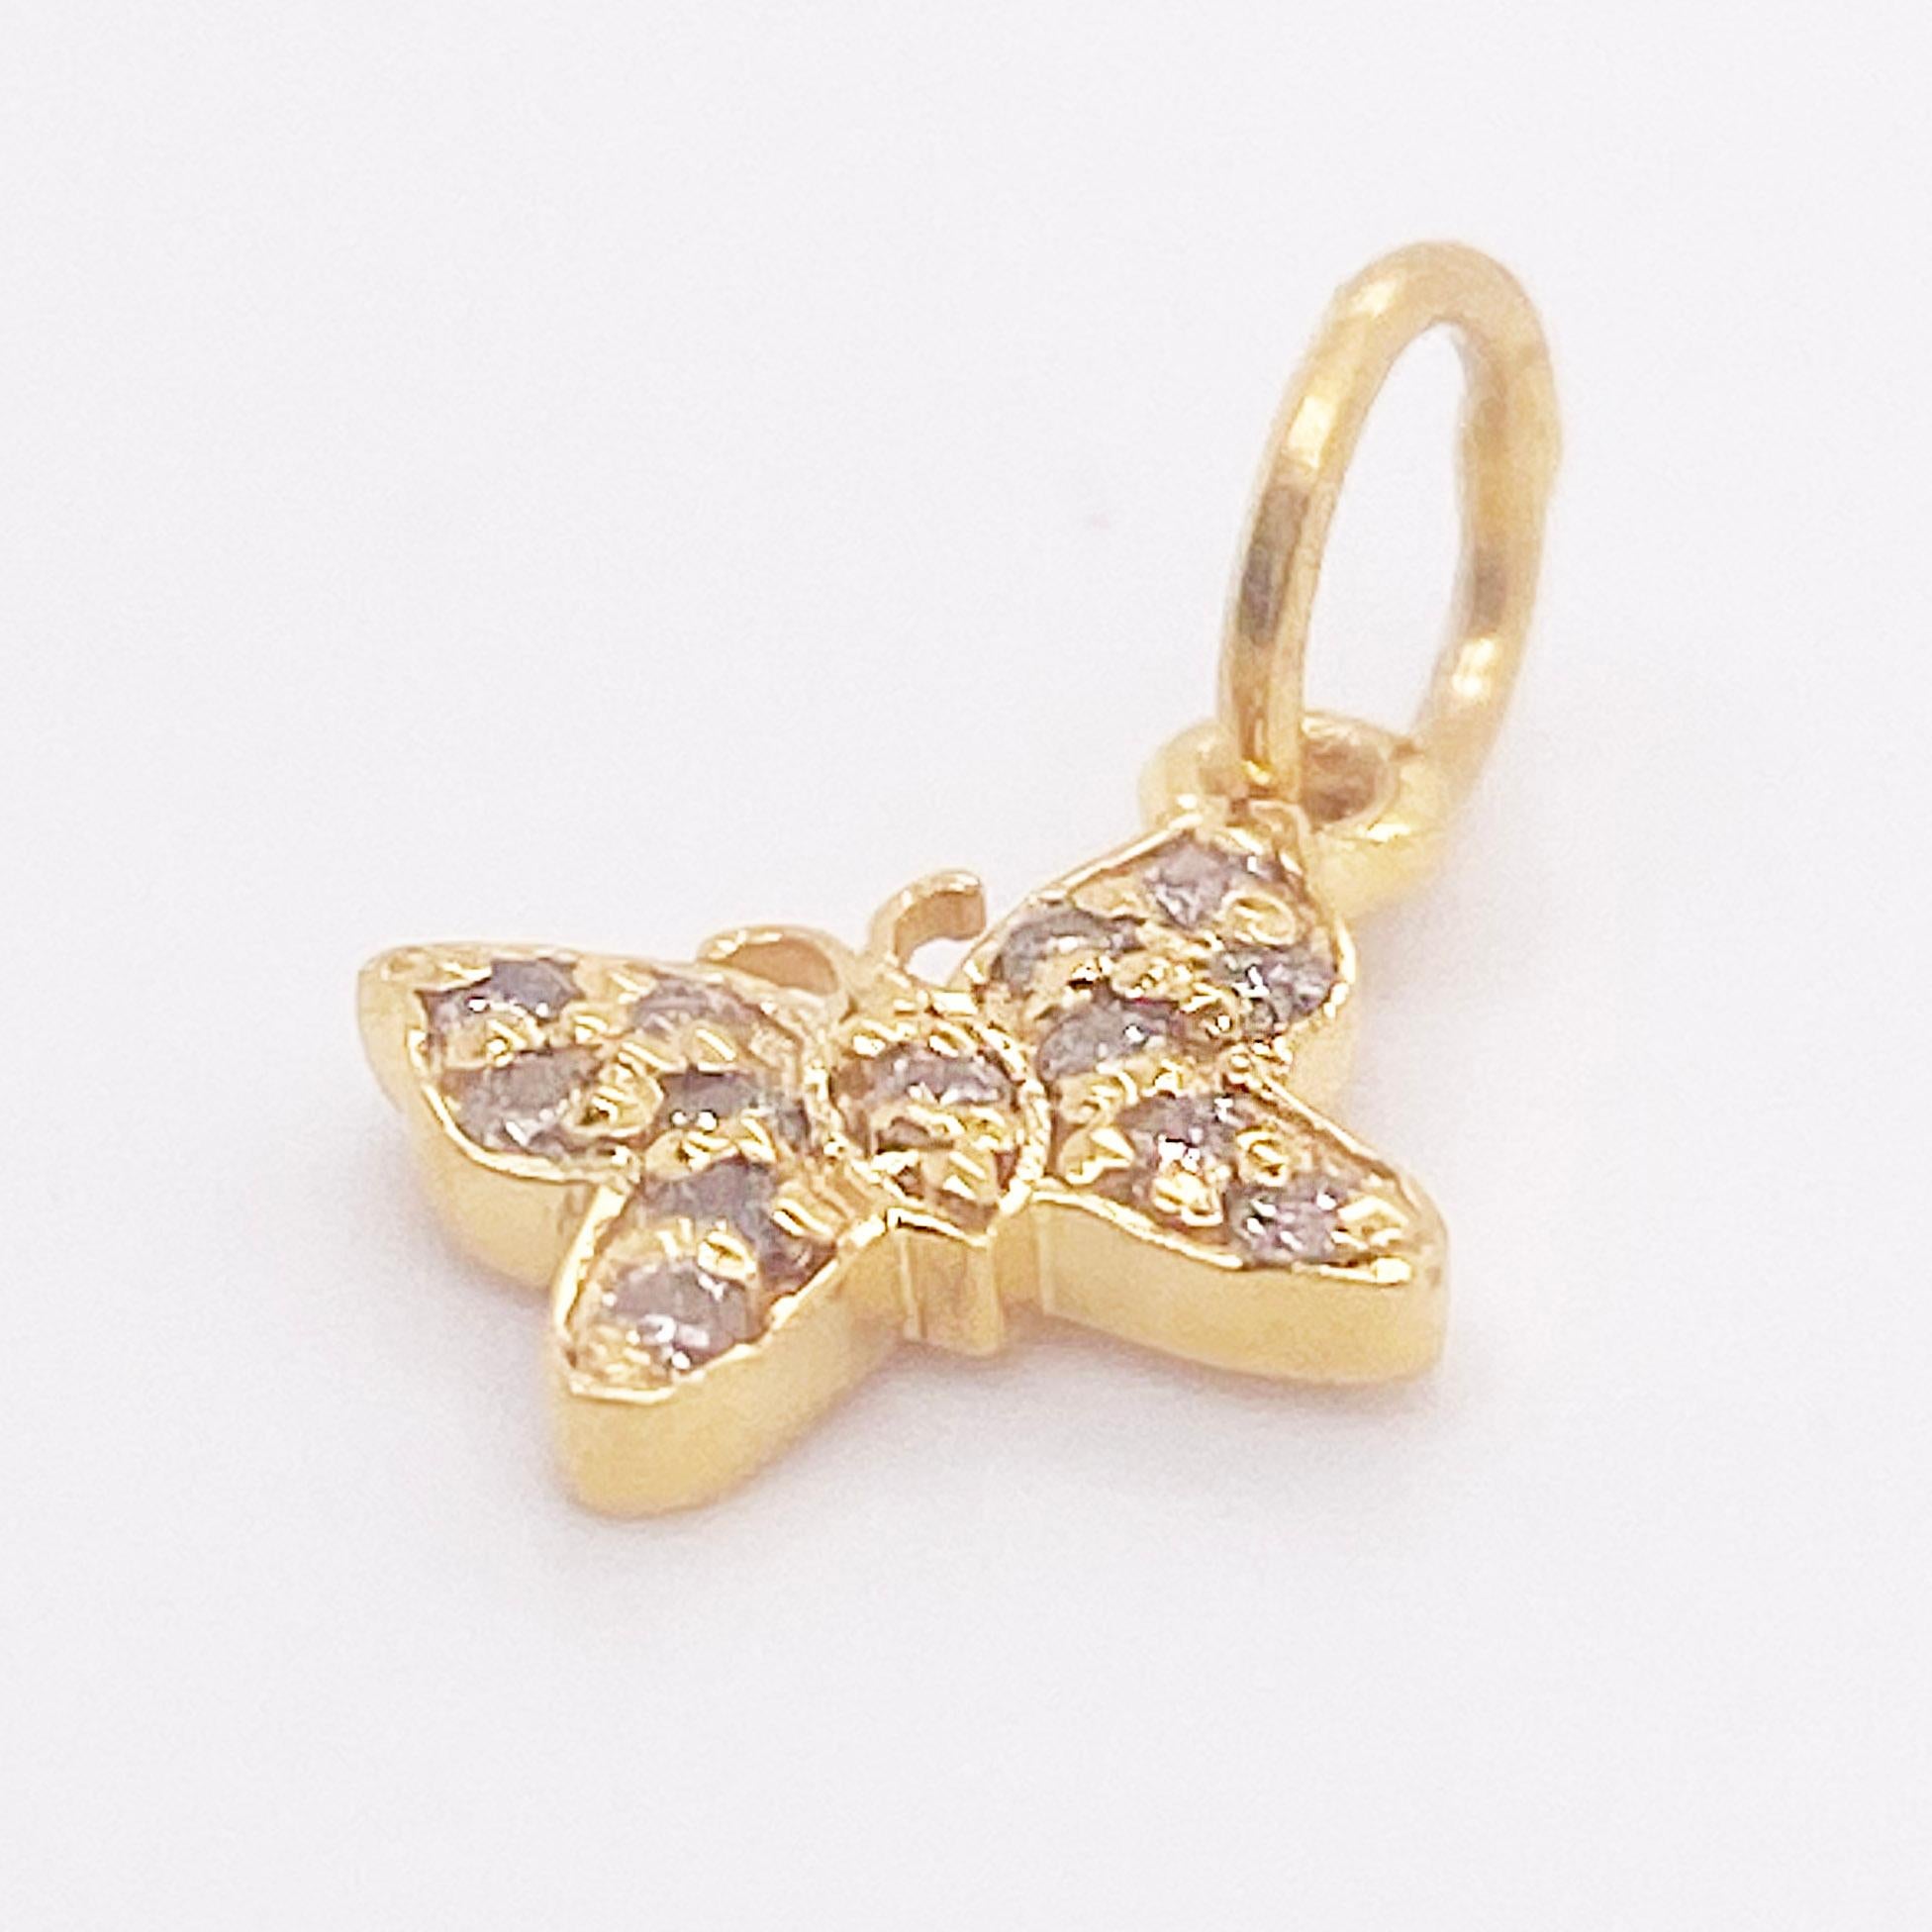 The details for this gorgeous charm are listed below:
Metal Quality: 14K Yellow Gold
Charm Type: Pave Butterfly
Charm Measurements: 5 Millimeters x 8 Millimeters
Diamond Number: 13
Diamond Shape: Round Brilliant
Diamond Clarity: VS2 (excellent, eye